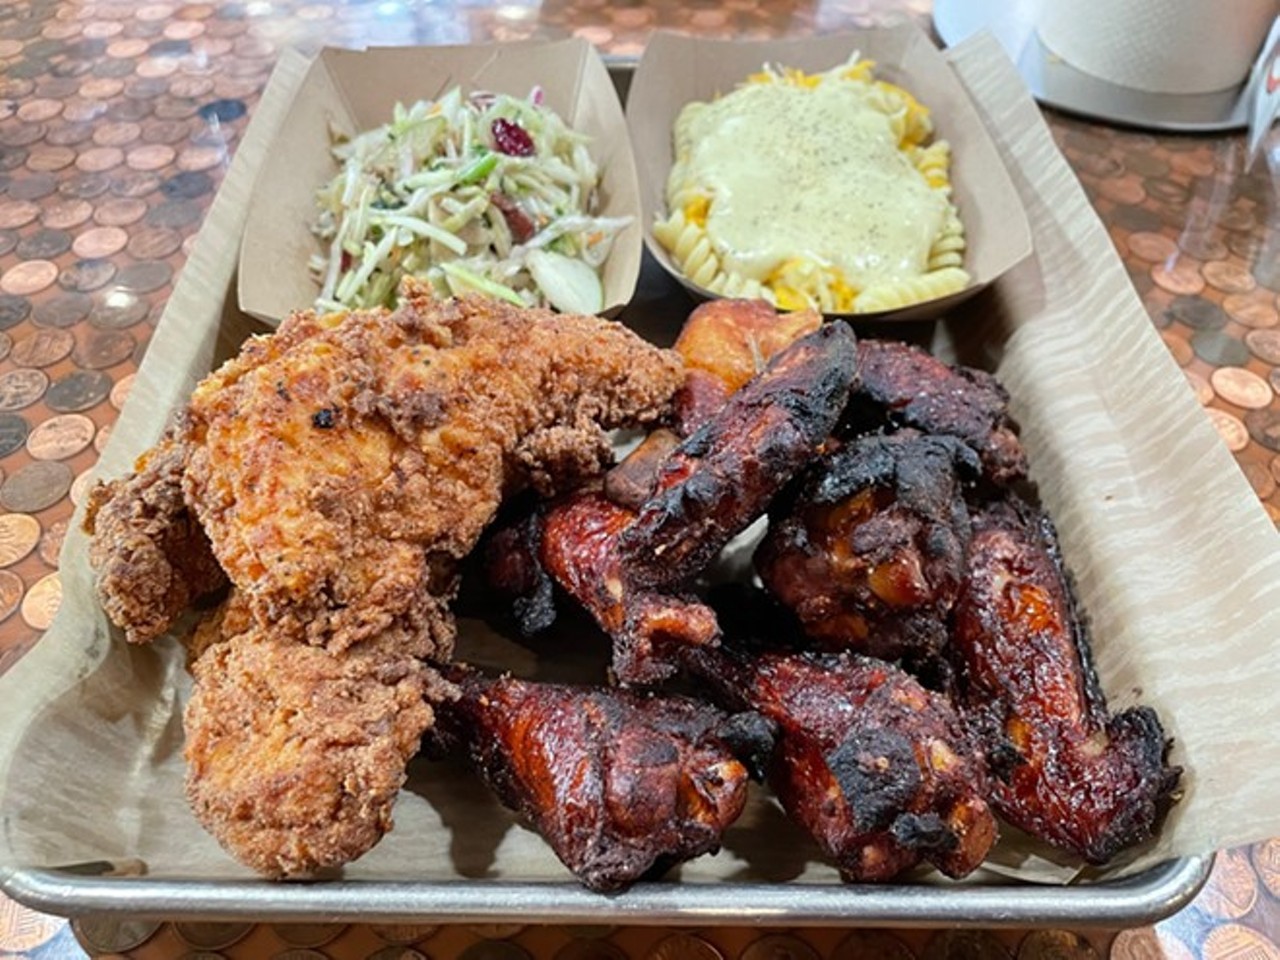  Boss ChickNBeer
120 Front St., Cuyahoga Falls
Location number four is in the works for Boss ChickNBeer, the justly praised chicken and beer restaurant owned by Heather Doeberling and Emily Moes. The pair opened the first shop in Berea back in 2018, added a spot in Bay Village in 2021, and expanded to Seven Hills the year after that. Next up is Front Street in downtown Cuyahoga Falls. The restaurant will be located in the recently approved DORA district, which allows pedestrians to walk around with alcoholic beverages. The new restaurant will be open sometime this fall. When it does, it will be the largest location to date, with seating for 48 indoors, a 24-seat patio, and the signature penny-topped bar.